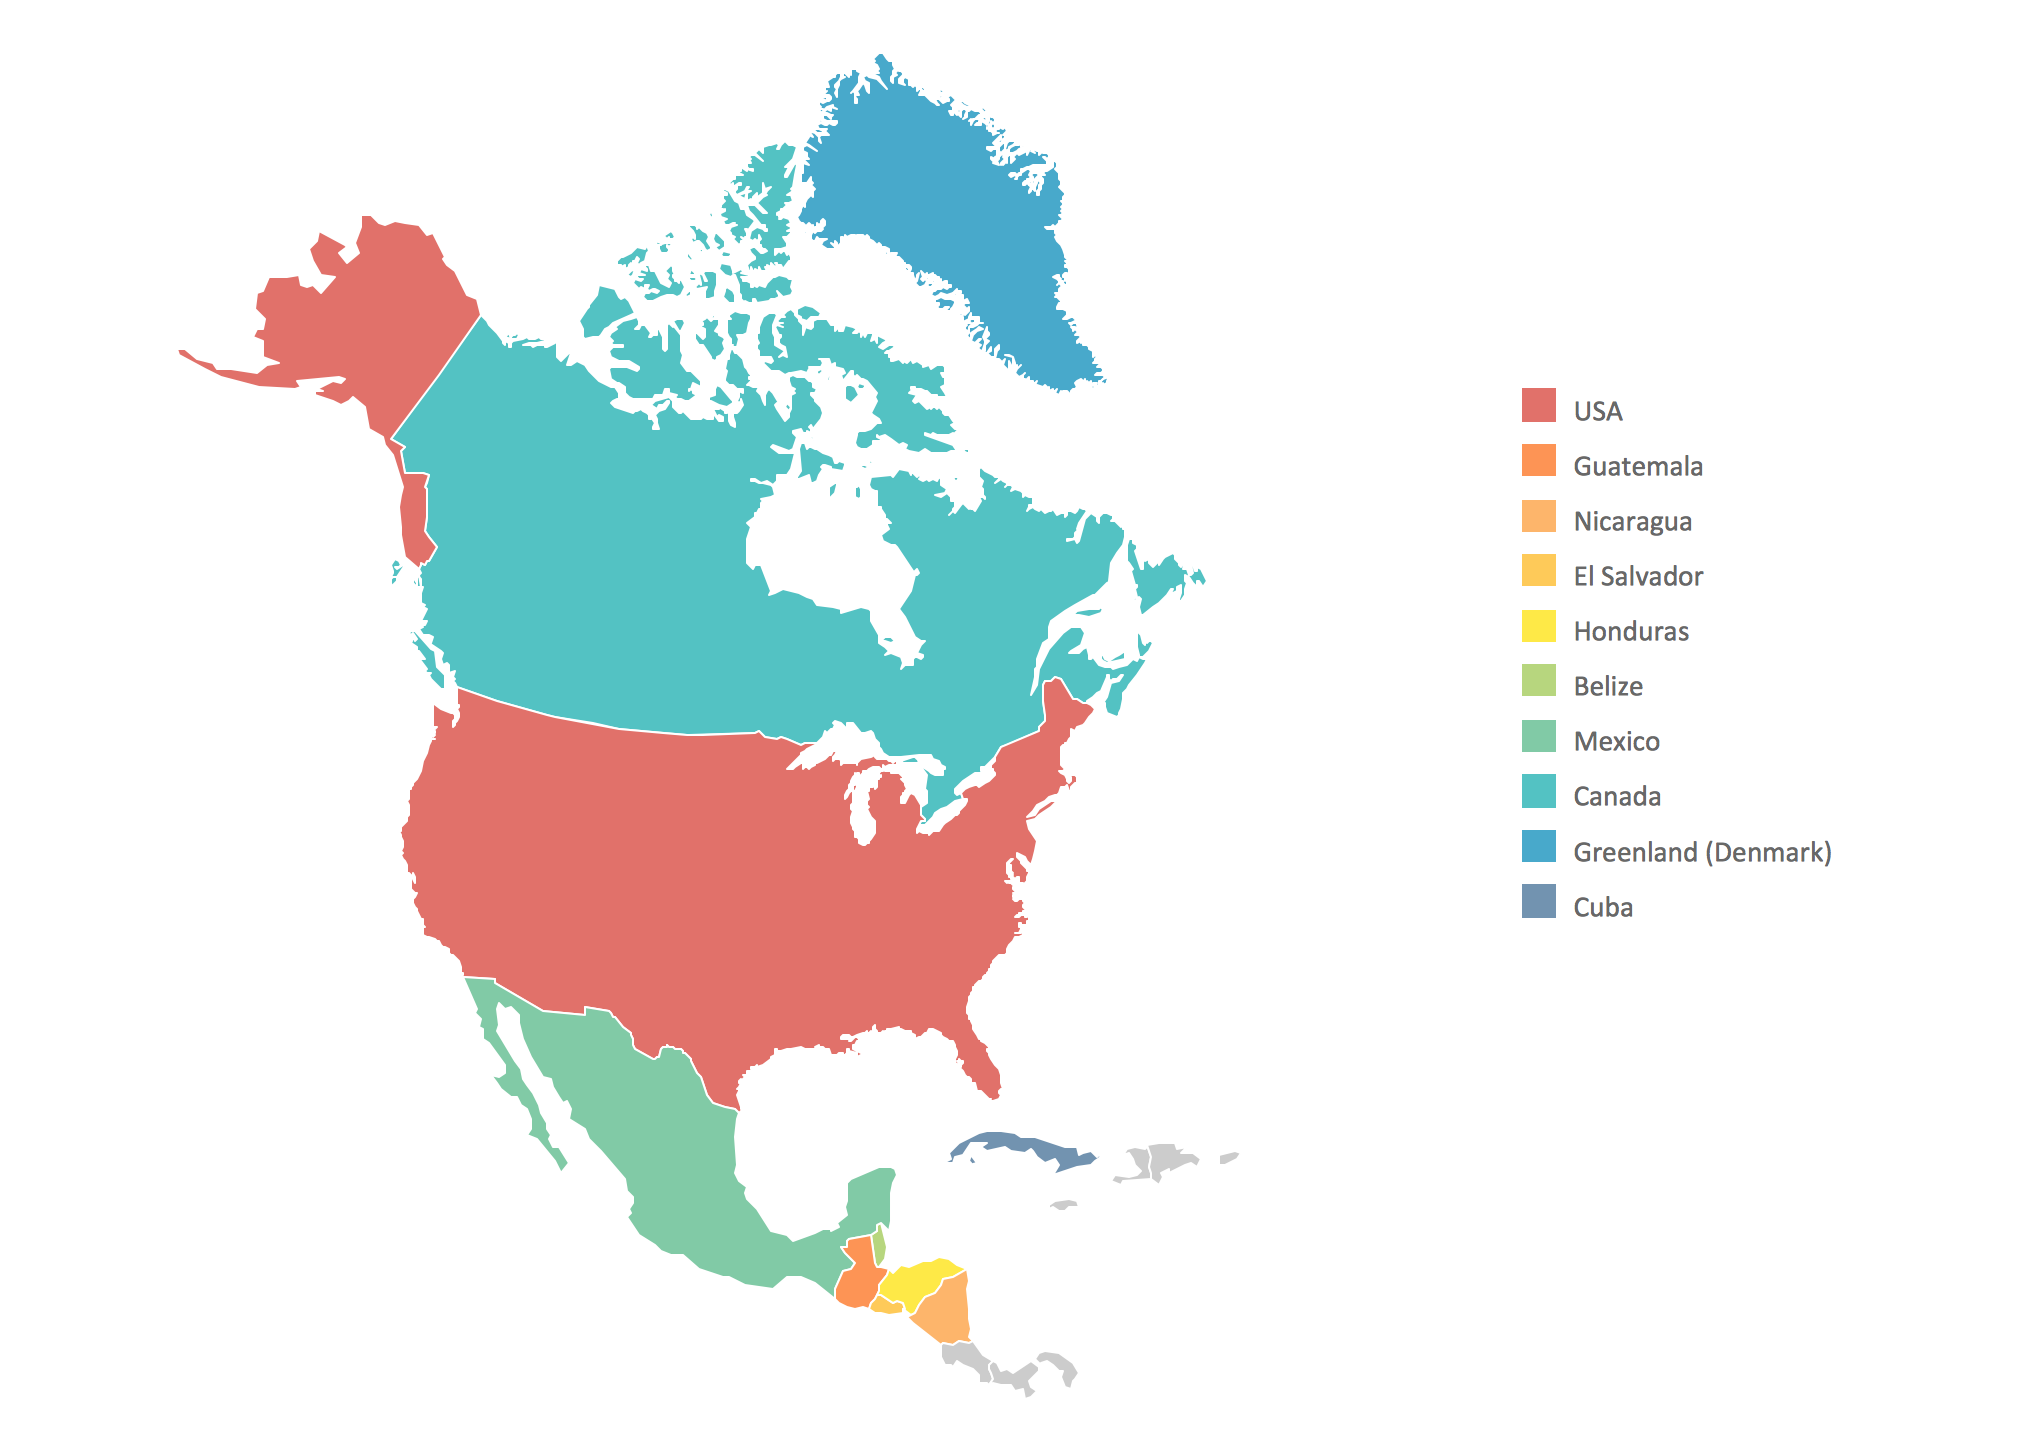 Map Of Americas